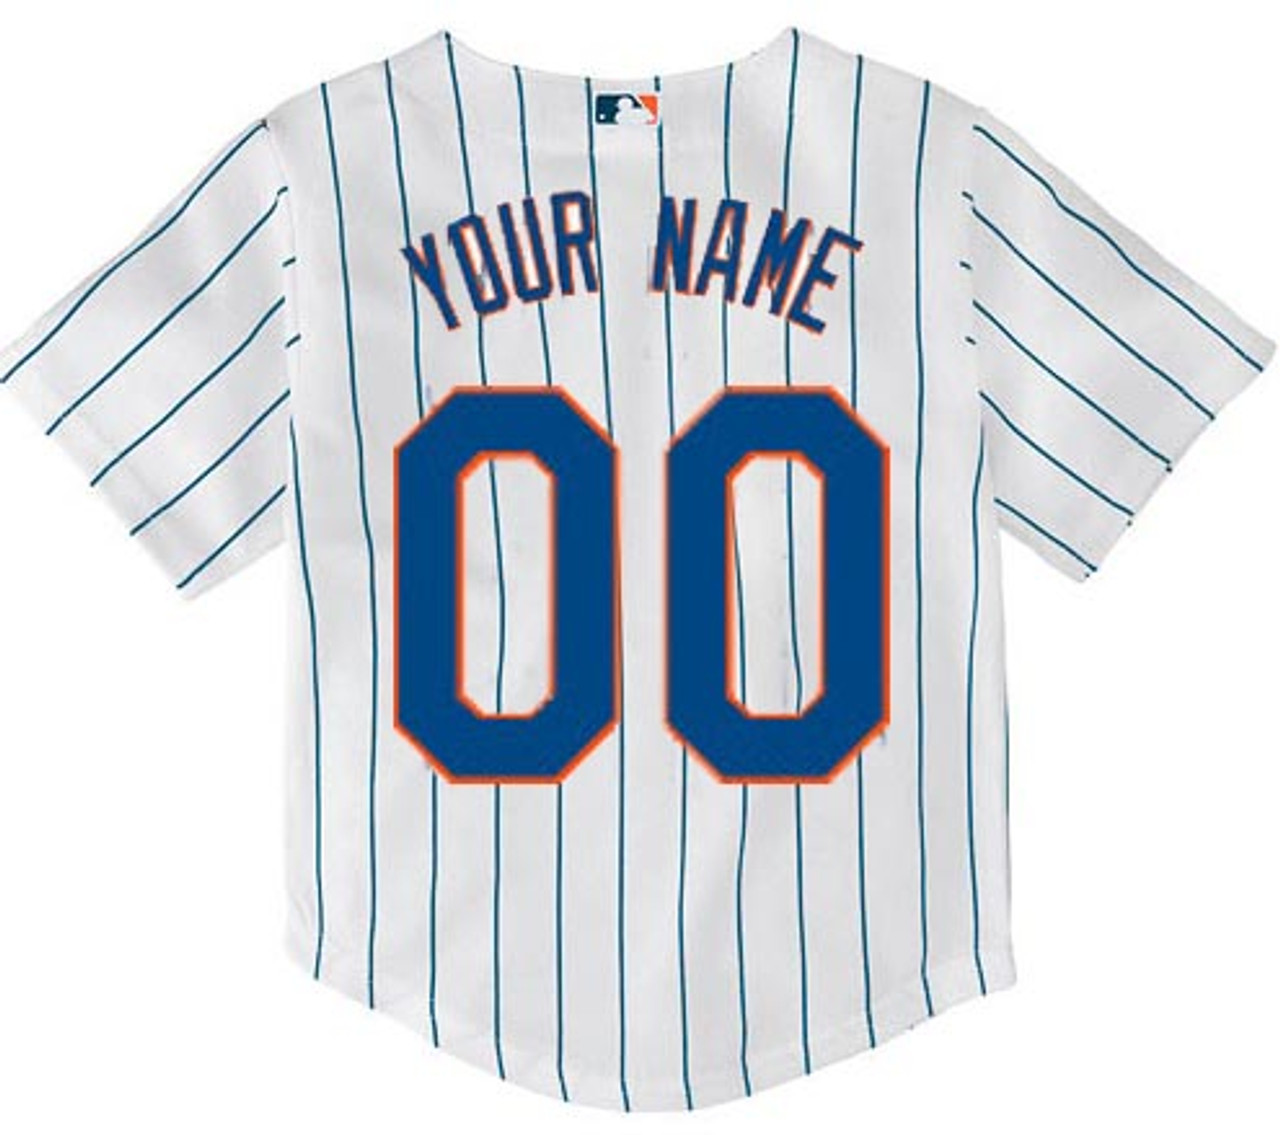 NY Mets Replica Personalized Kids Home Jersey